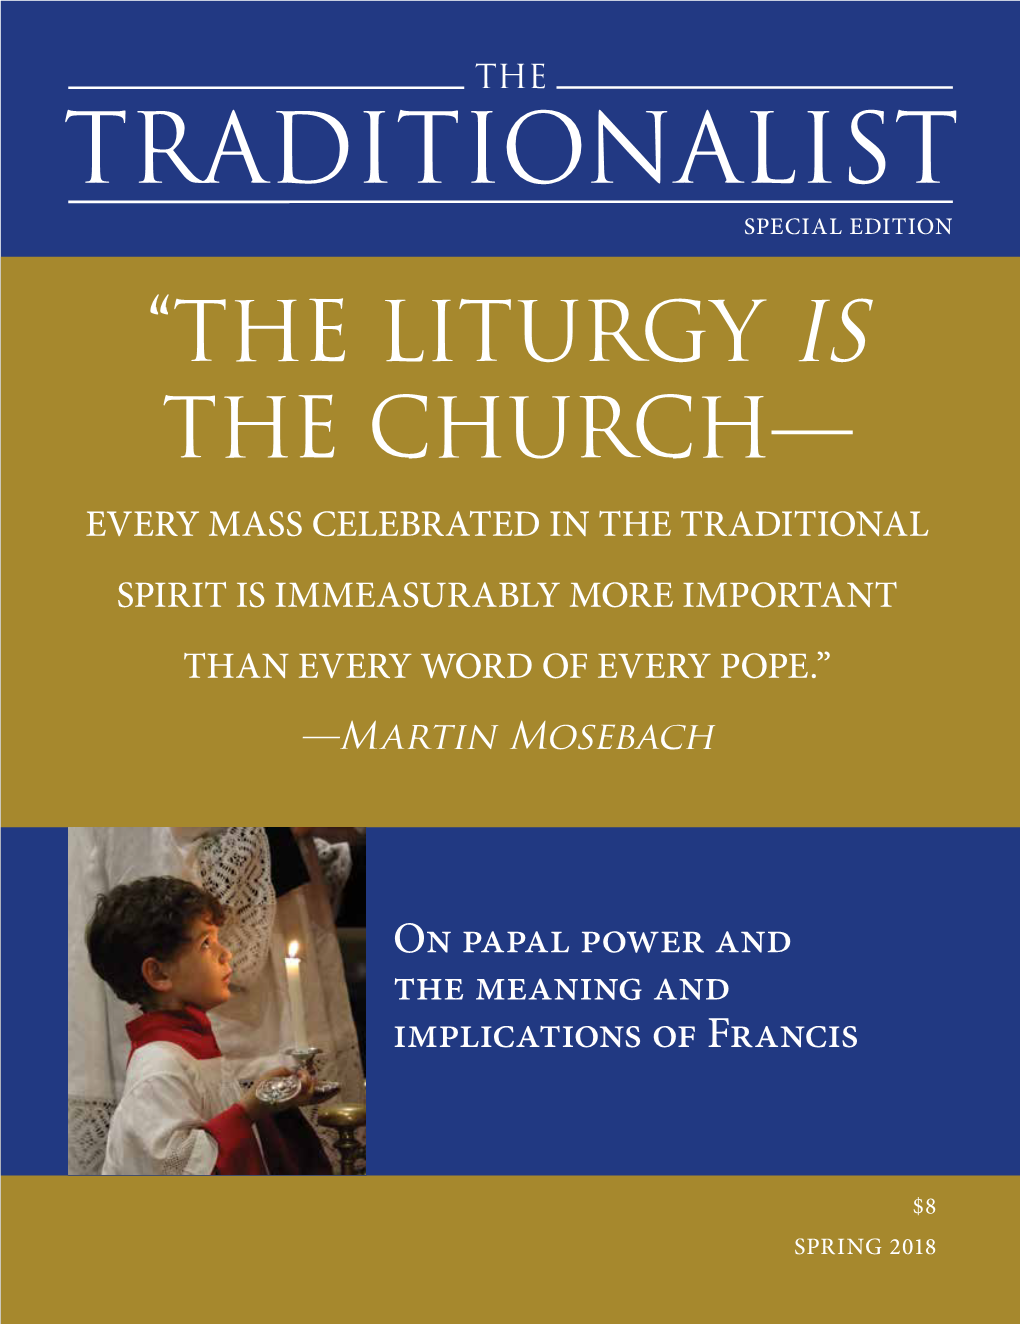 “THE LITURGY IS the CHURCH— EVERY MASS CELEBRATED in the TRADITIONAL SPIRIT IS IMMEASURABLY MORE IMPORTANT THAN EVERY WORD of EVERY POPE.” —Martin Mosebach